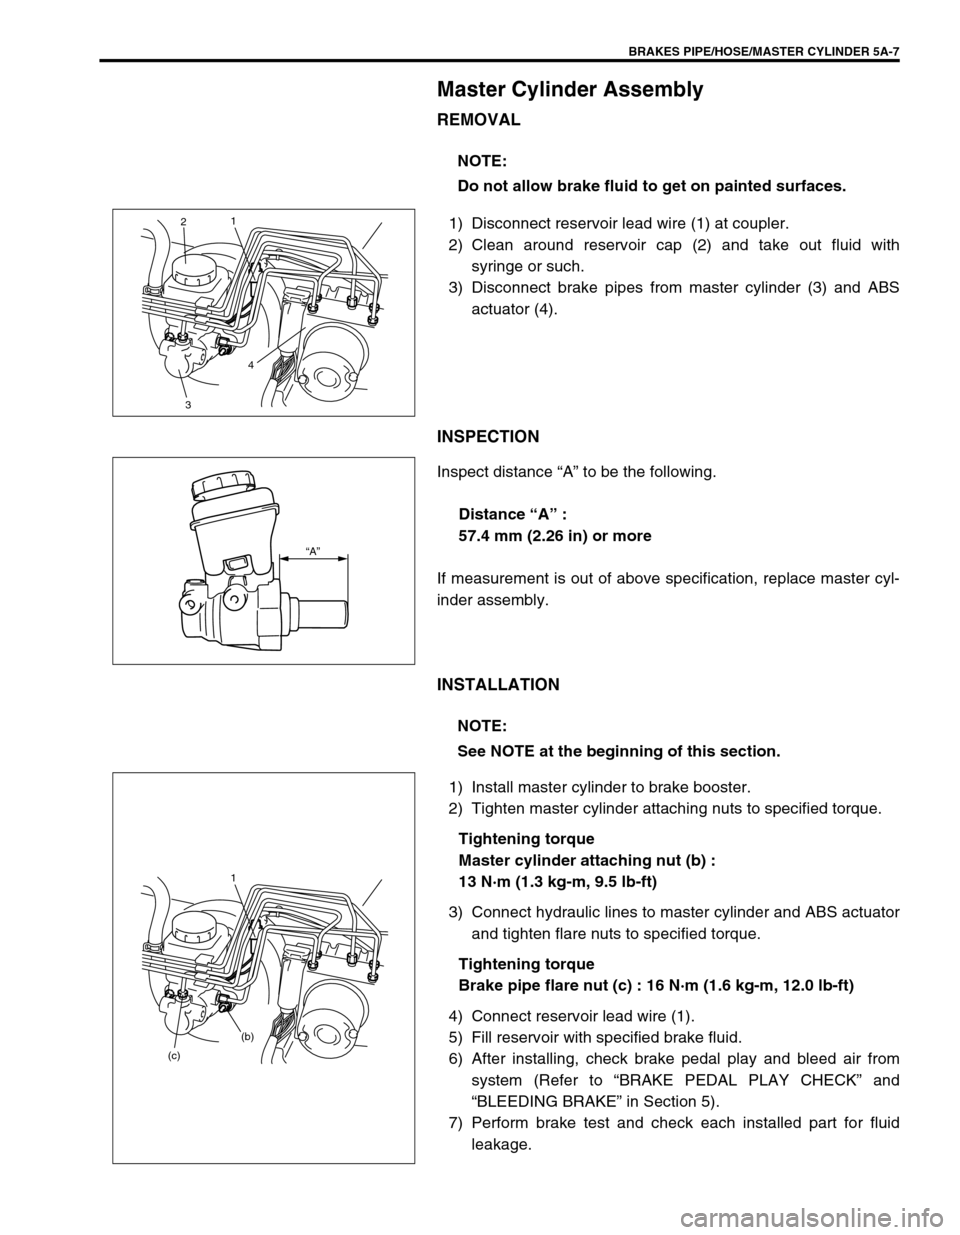 SUZUKI GRAND VITARA 2001 2.G Owners Manual BRAKES PIPE/HOSE/MASTER CYLINDER 5A-7
Master Cylinder Assembly
REMOVAL
1) Disconnect reservoir lead wire (1) at coupler.
2) Clean around reservoir cap (2) and take out fluid with
syringe or such.
3) D